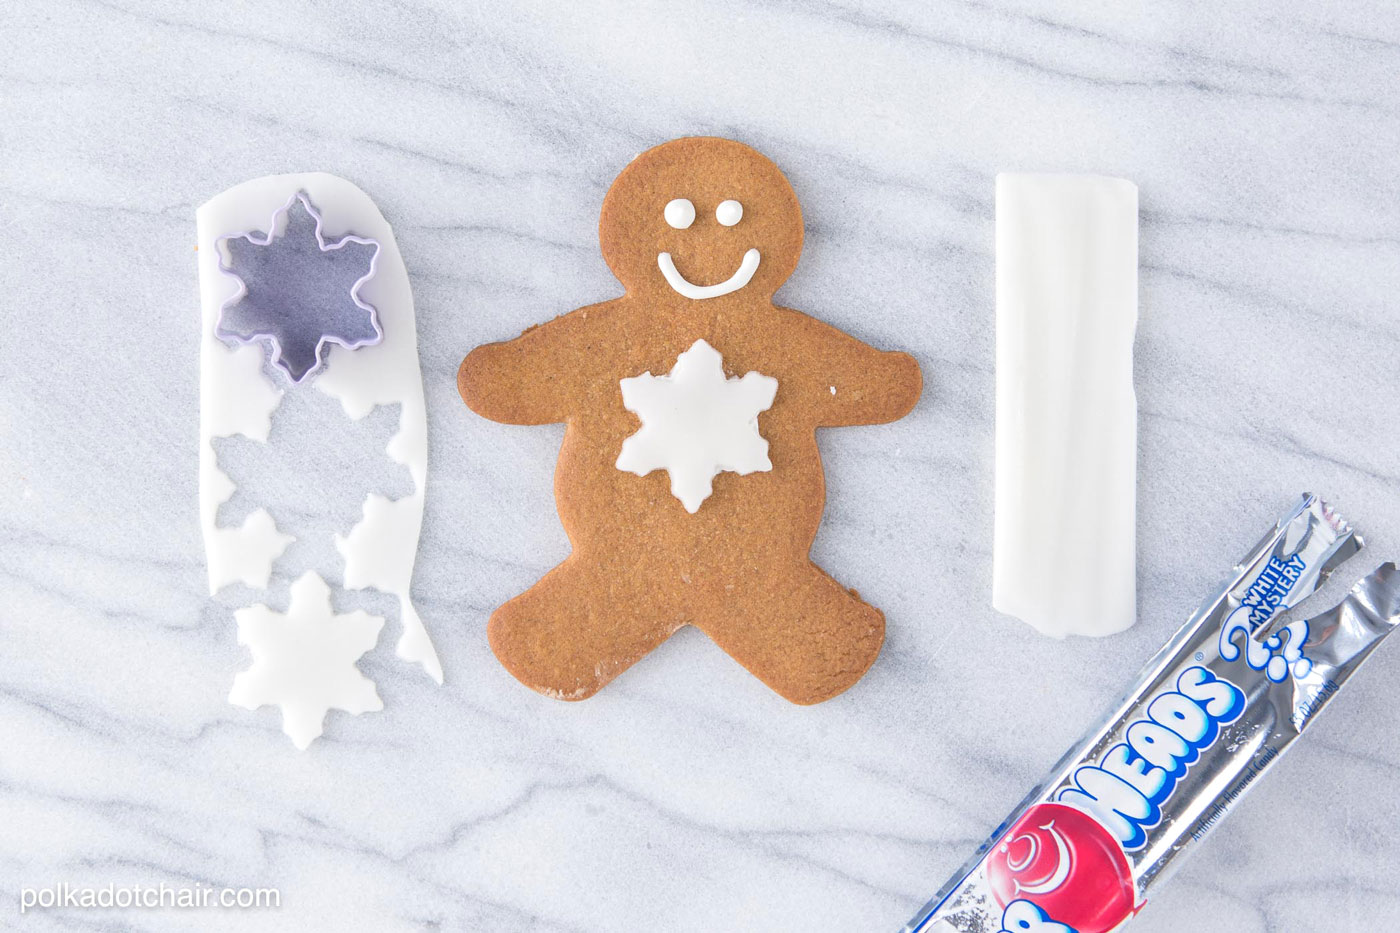 Gingerbread Christmas Cookie Decorating Ideas, use Airheads candy to cut out "clothes" and accessories for your gingerbread men